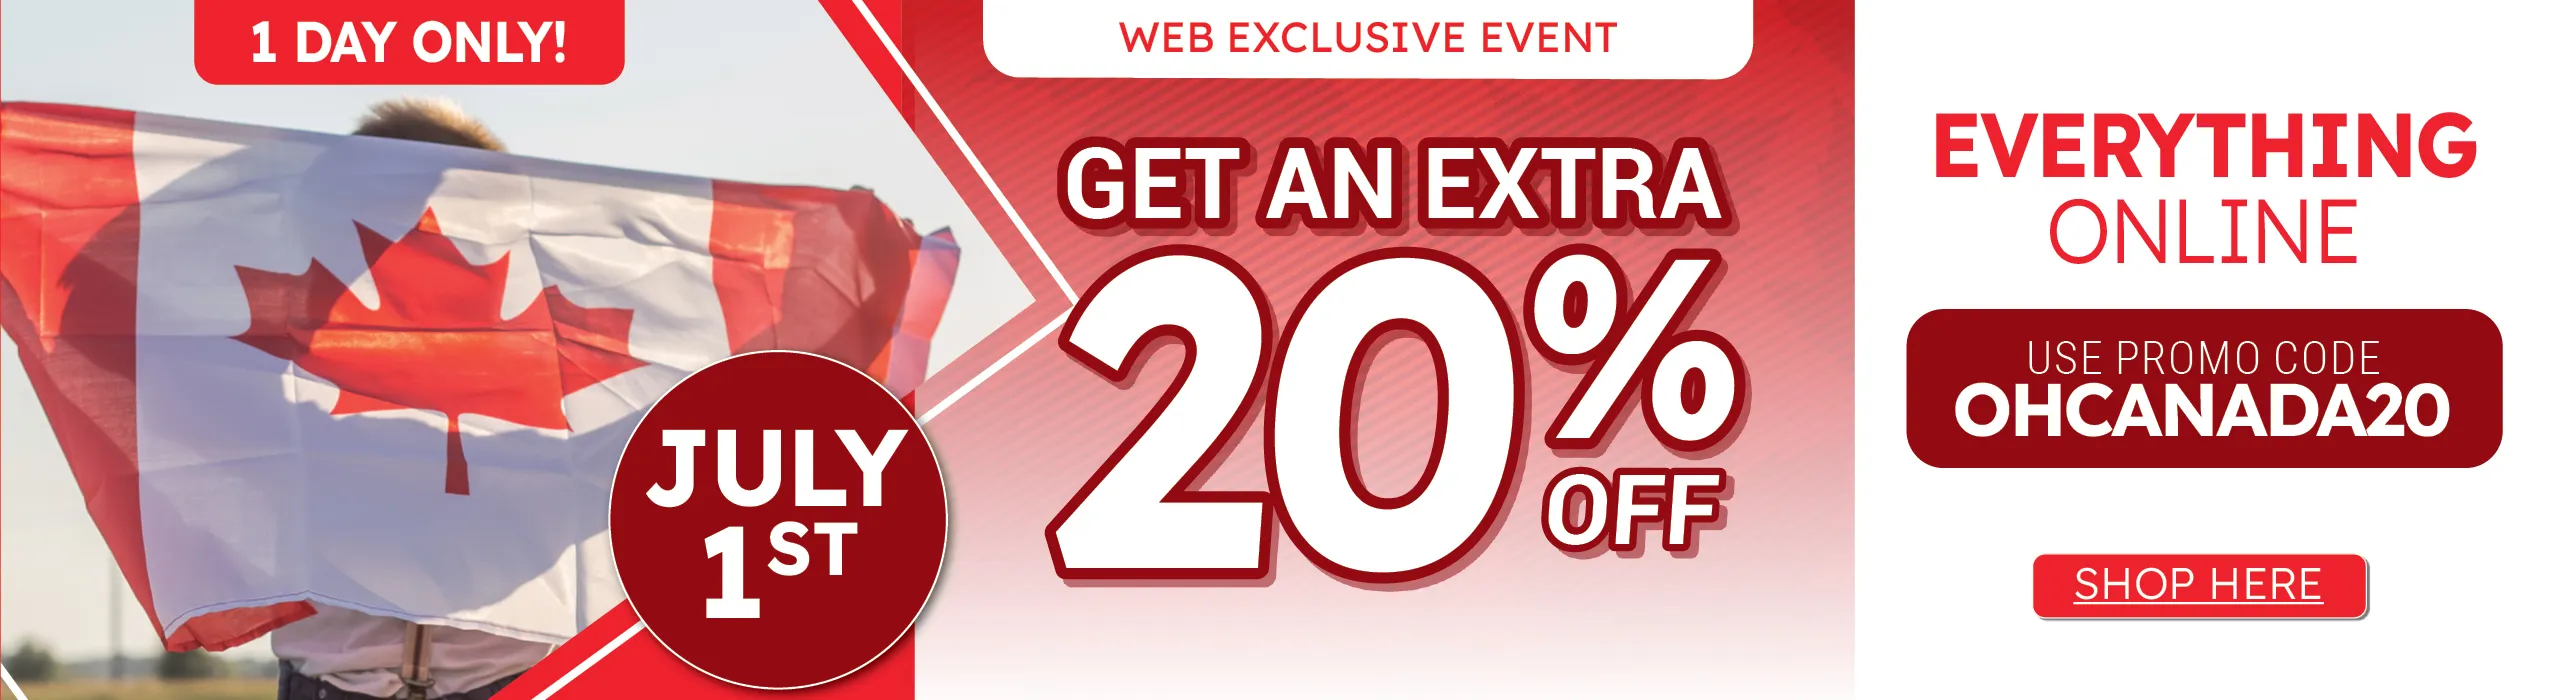 Happy Canada Day. Get an extra 20% OFF SITEWIDE. Use promo code OHCANADA20